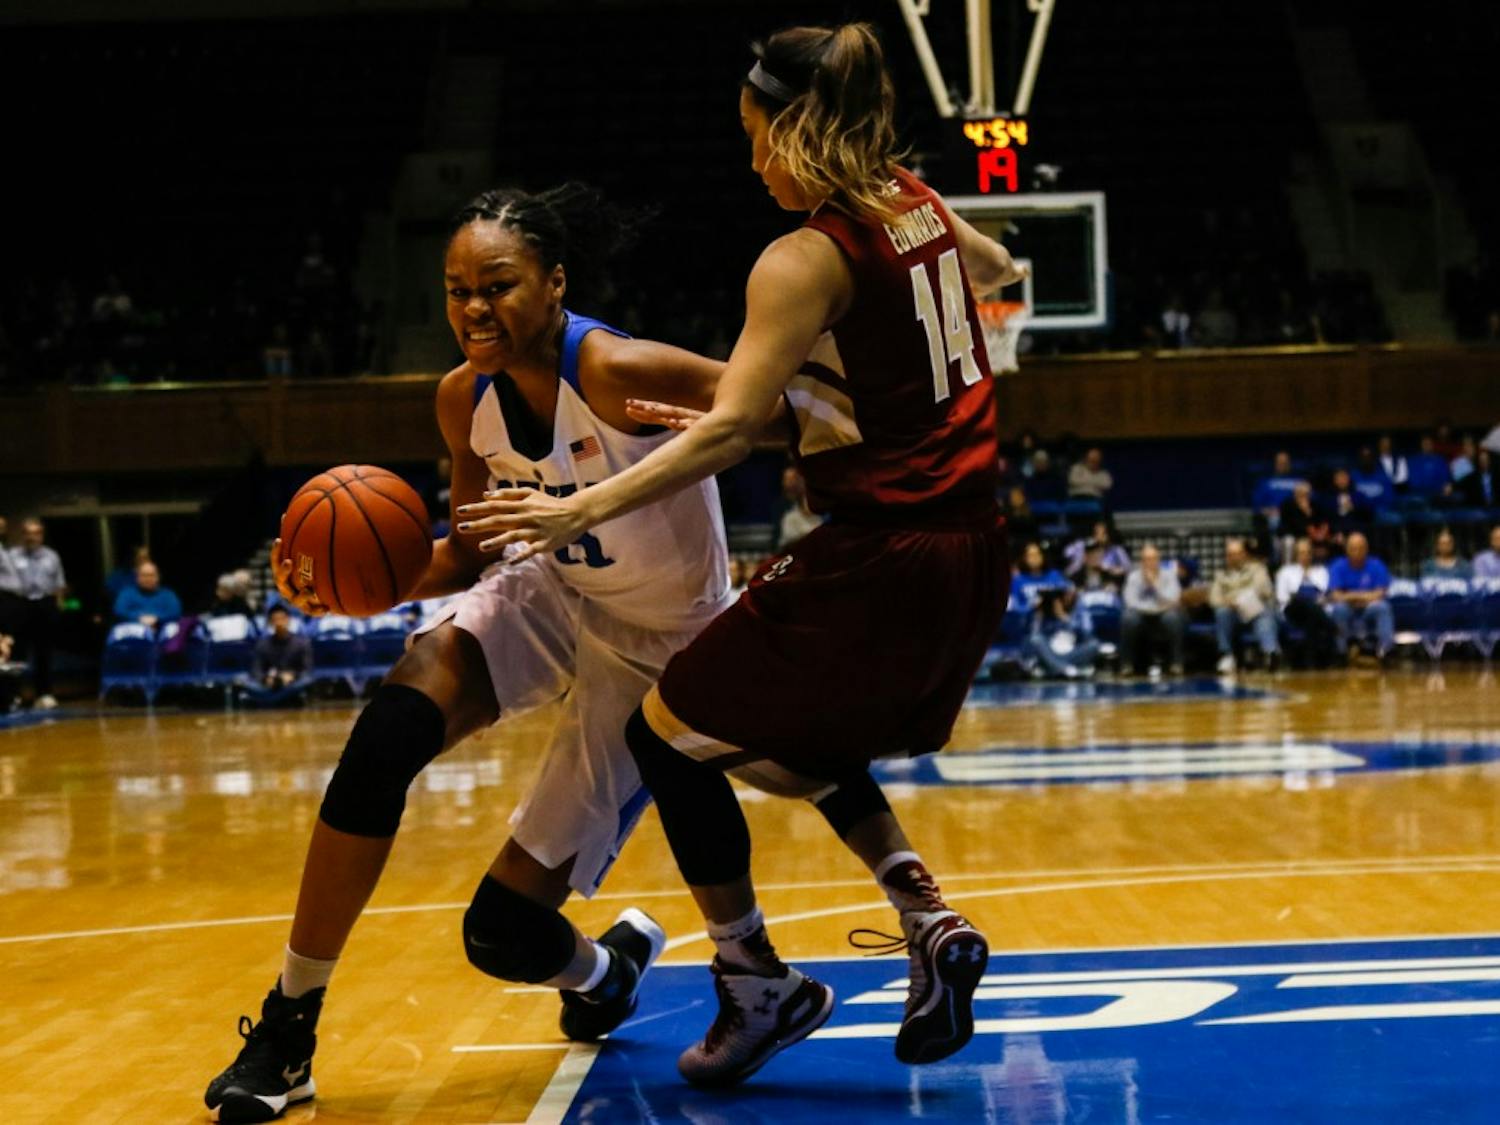 Sophomore Azurá Stevens scored 17 points to go with 14 rebounds as the Blue Devils got back on track with a win against Boston College Sunday.